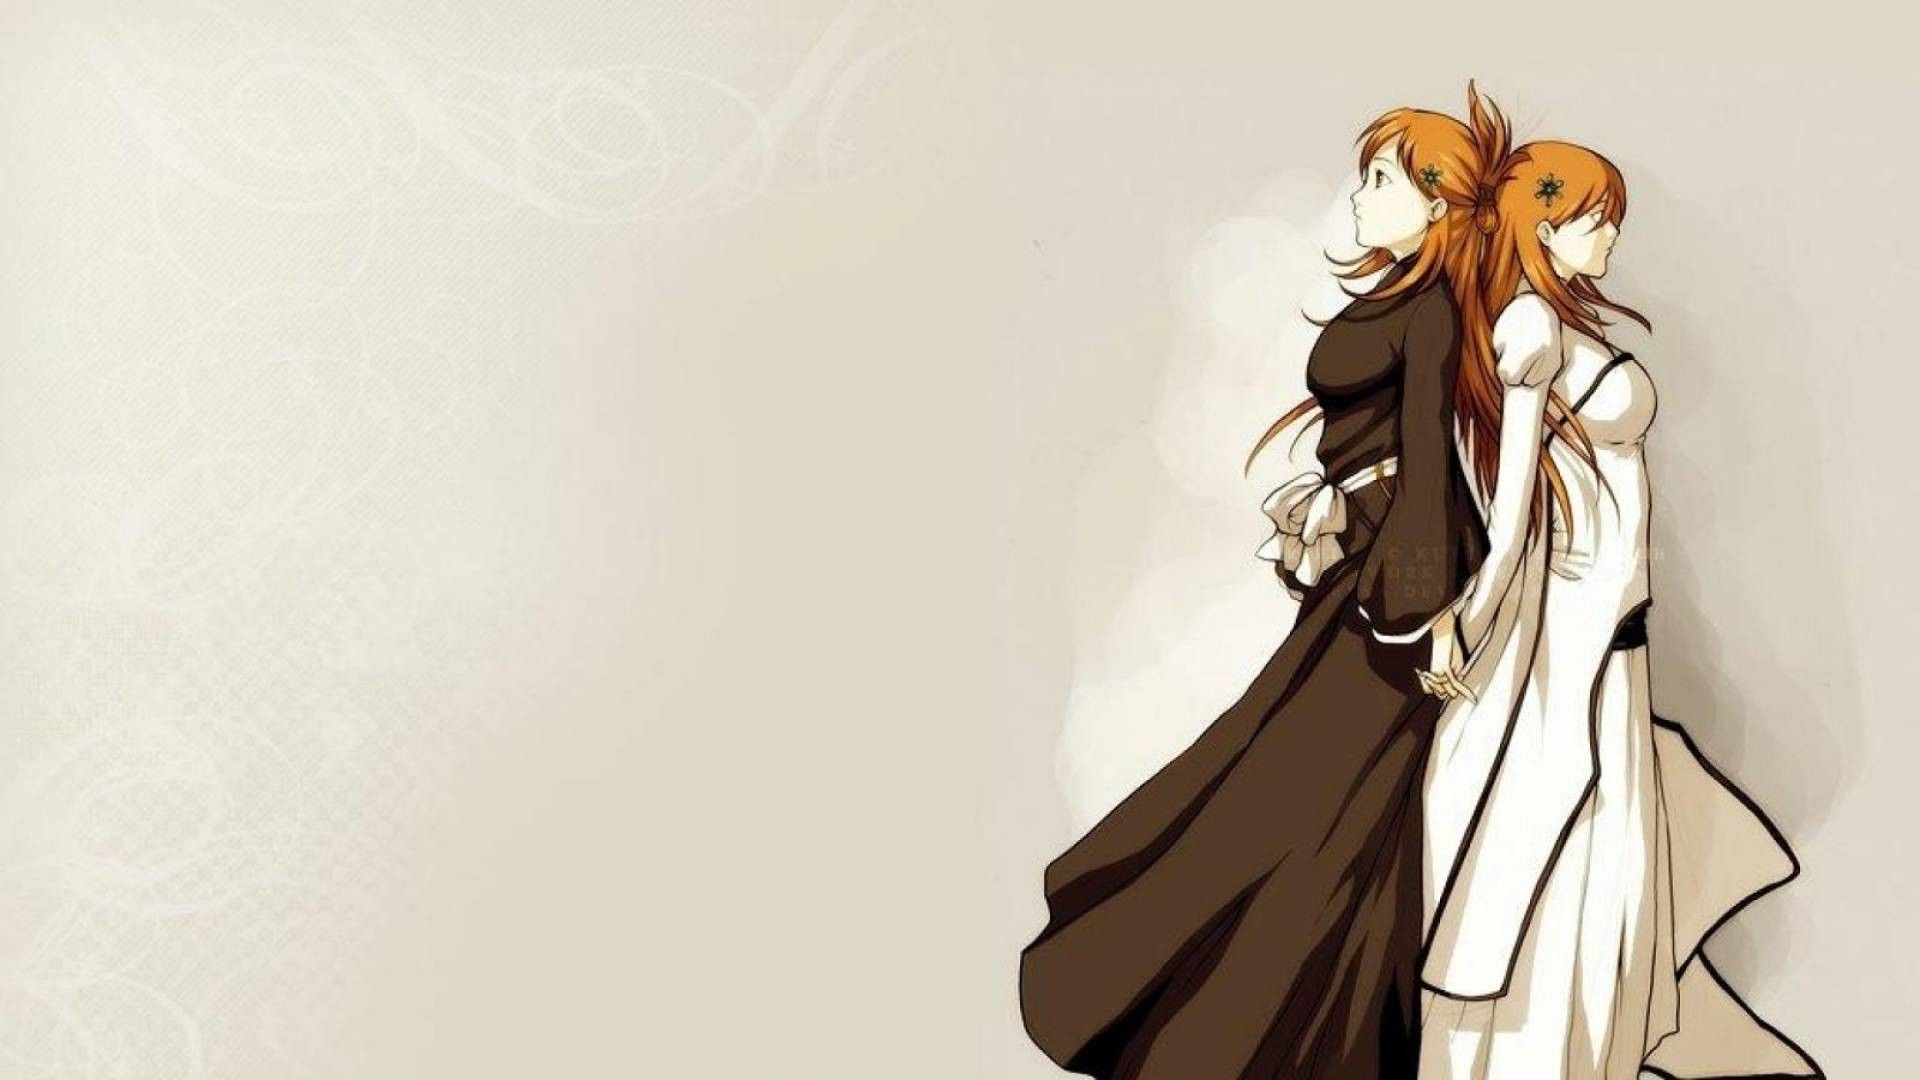 1920x1080 Orihime Inoue 4K Wallpapers Top Free Orihime Inoue 4K Backgrounds